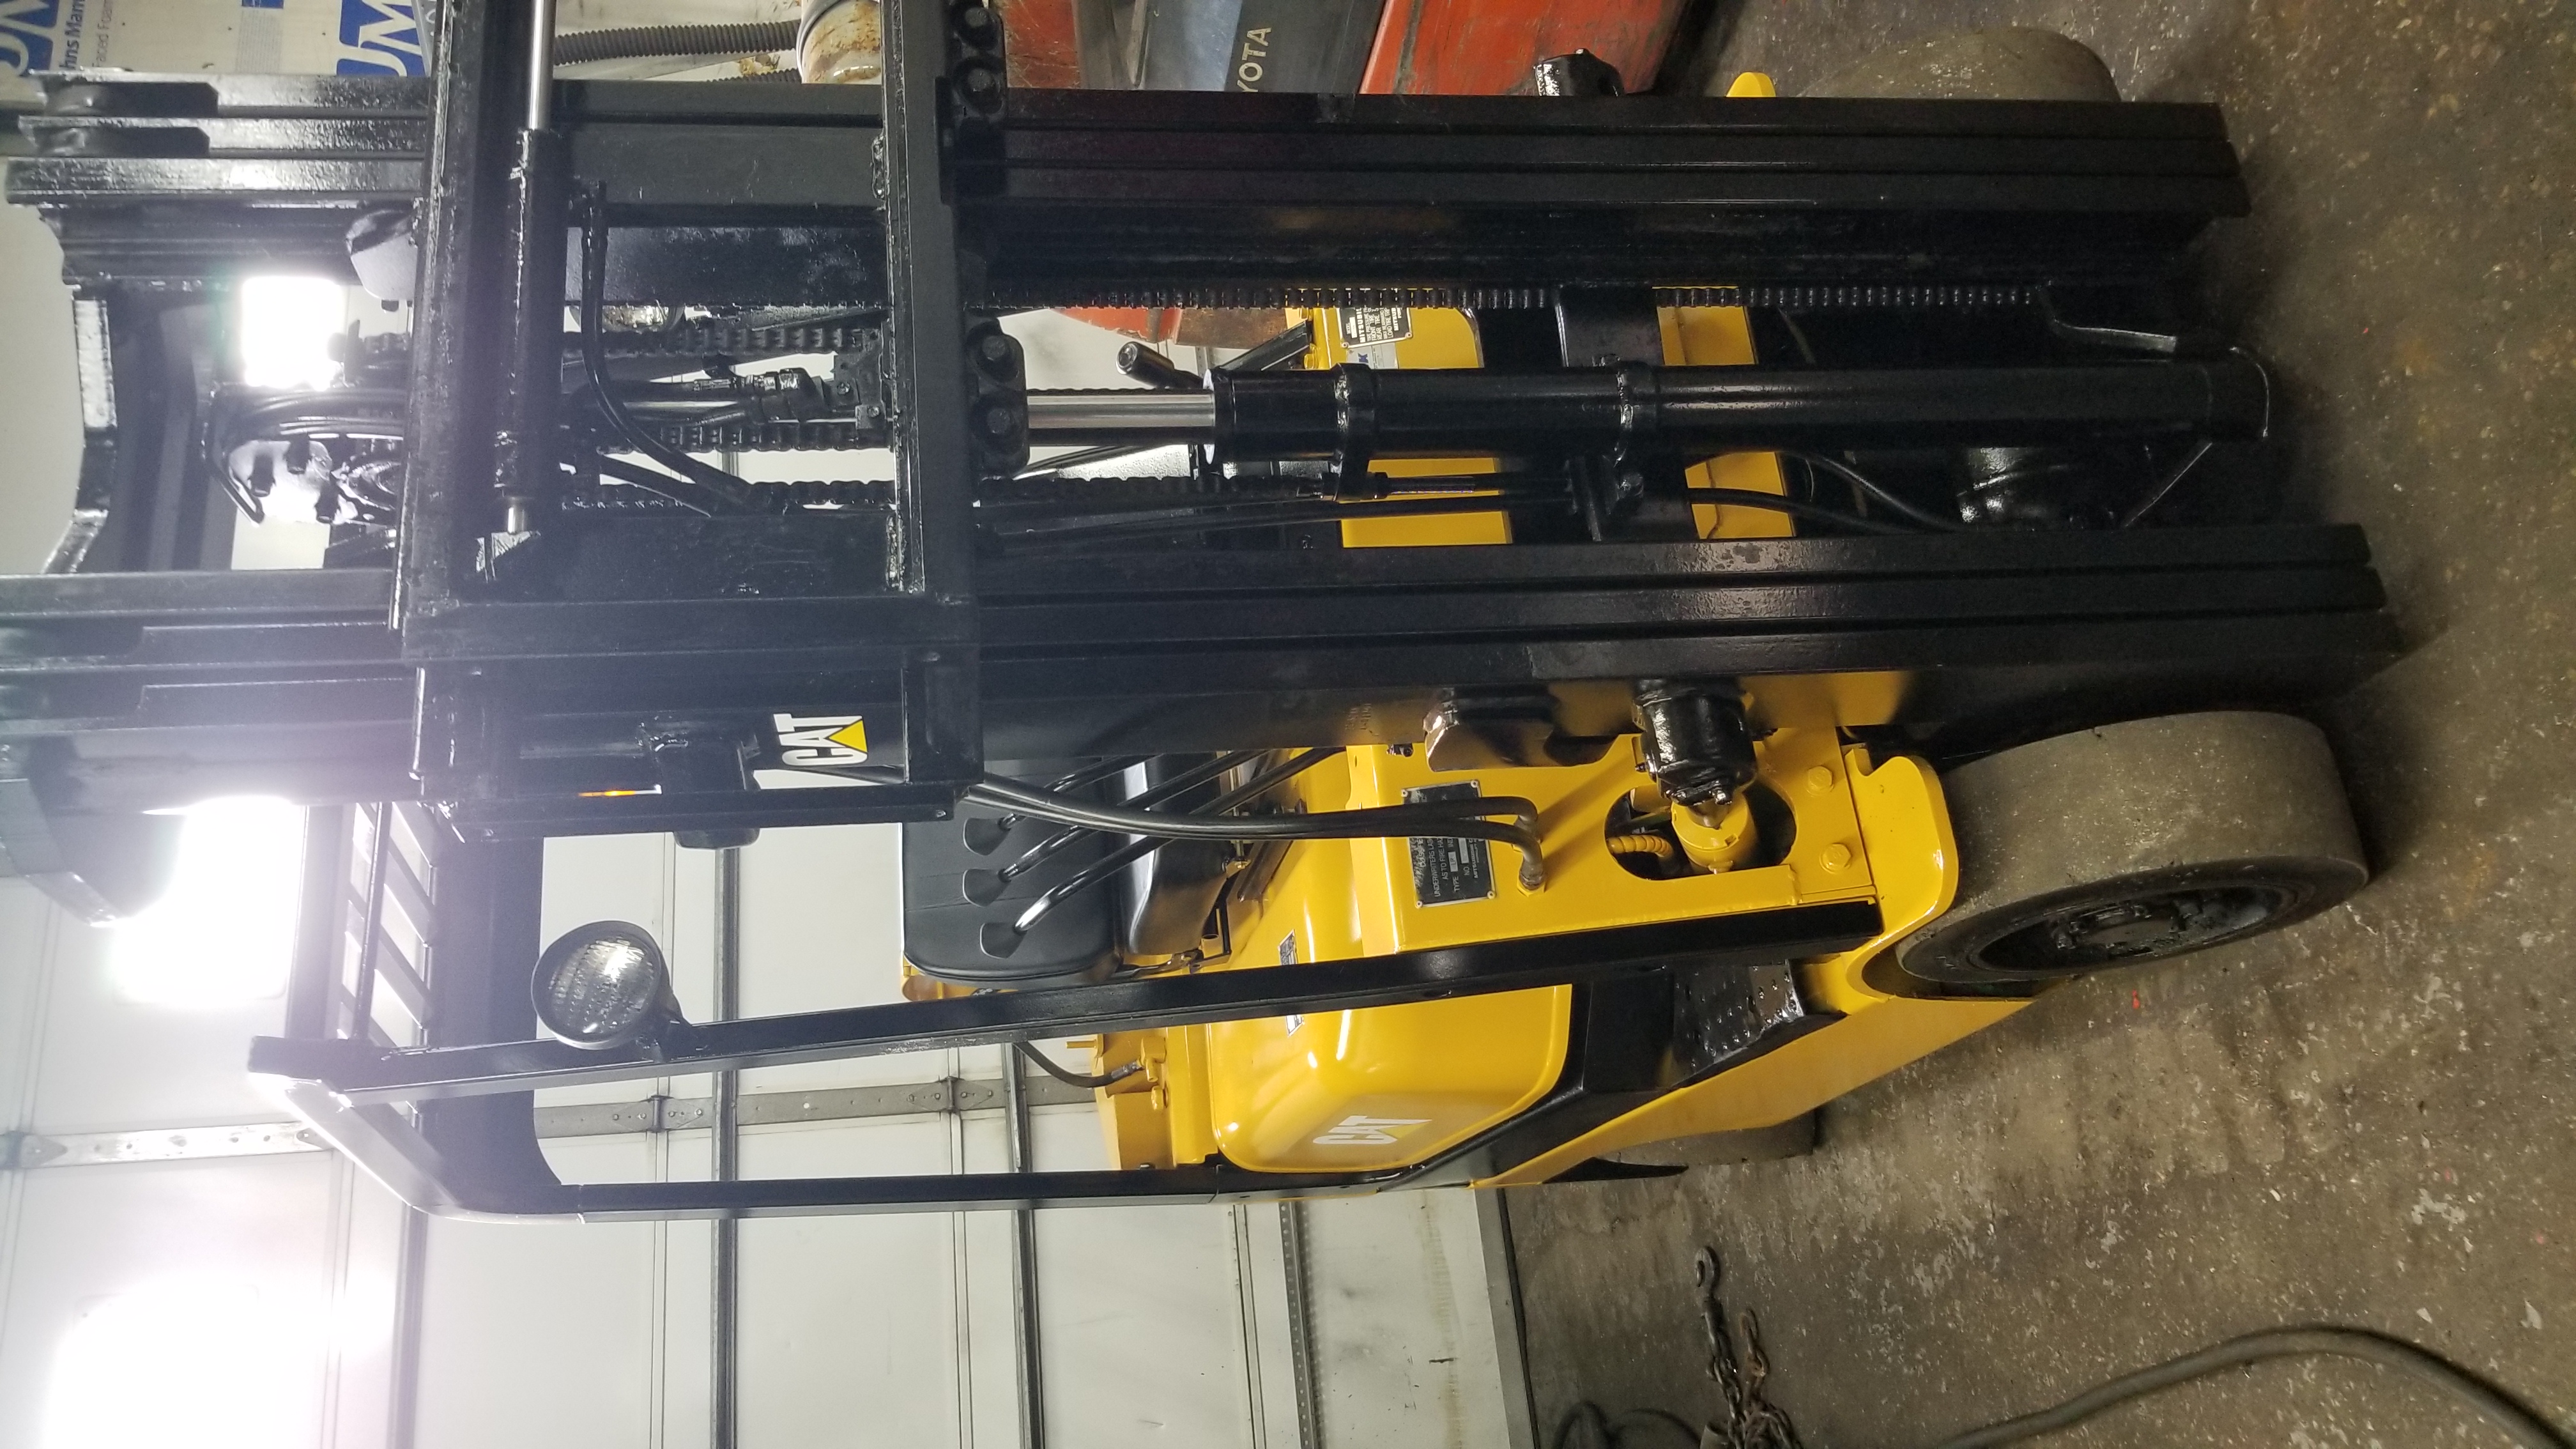 2000 caterpillar forklift with 188" lift height for sale